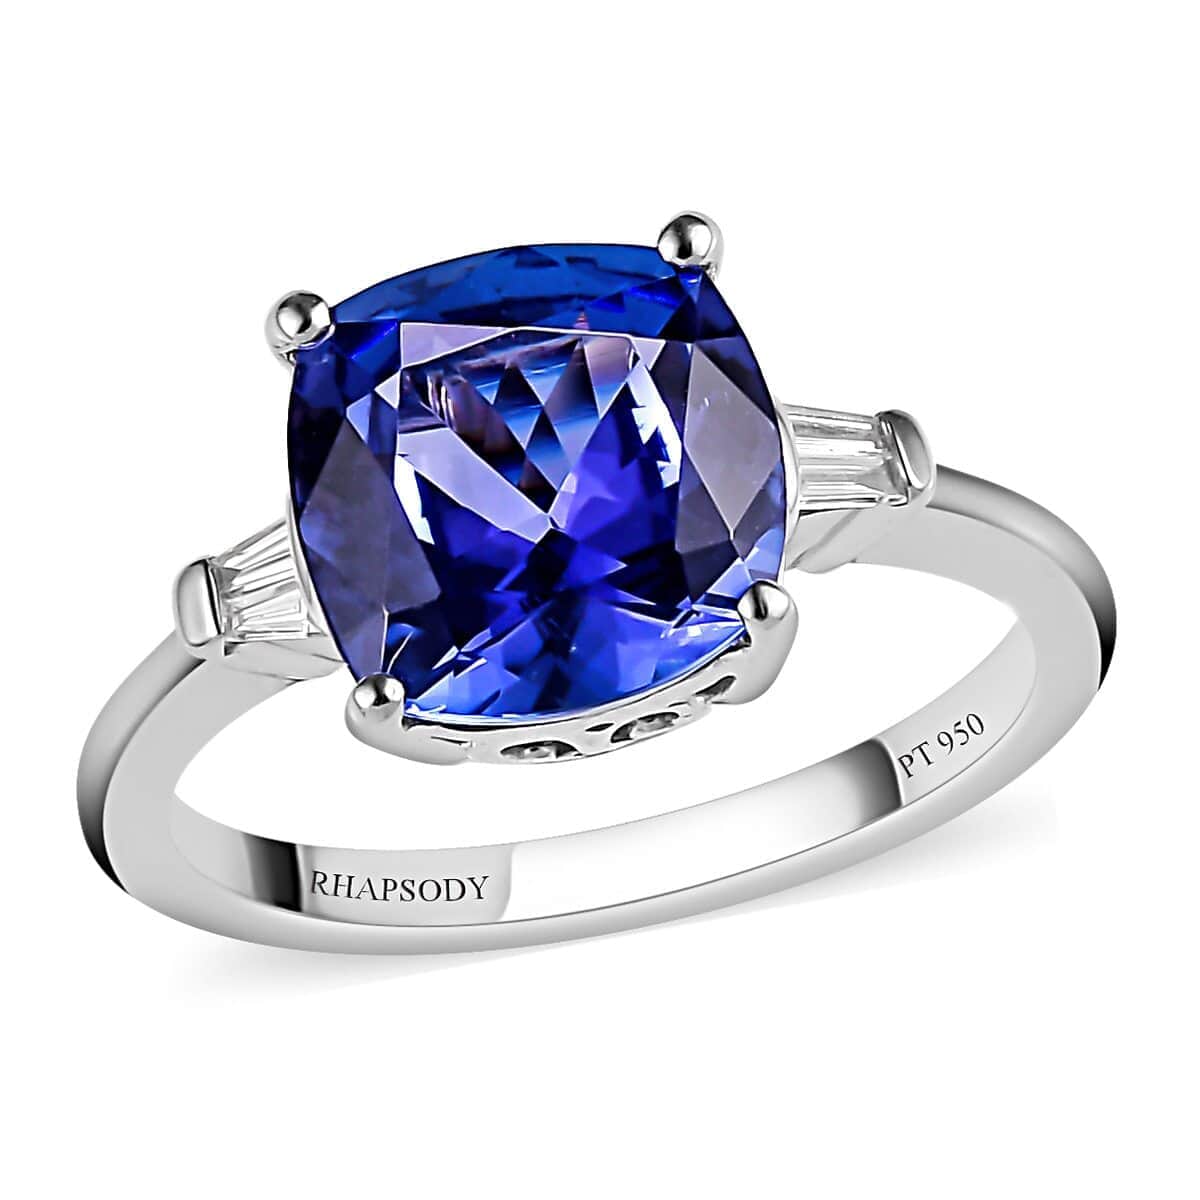 RHAPSODY 950 Platinum AAAA Tanzanite and E-F VS Diamond Ring 4.65 Grams (Delivery in 15-20 Business Days) 3.70 ctw image number 0